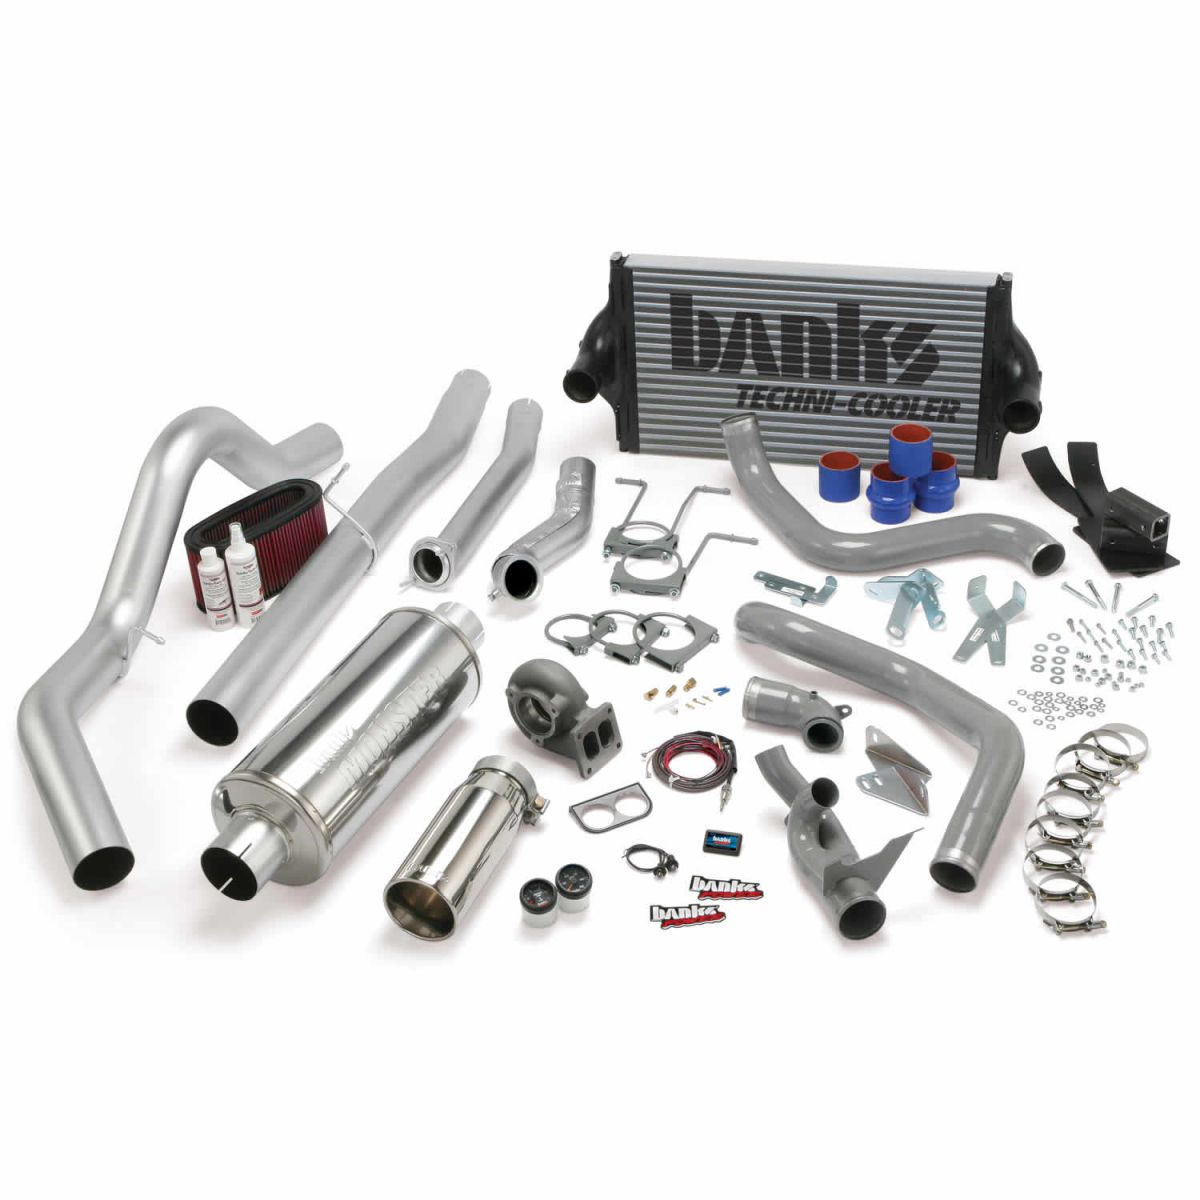 Banks Power - Banks Power PowerPack Bundle Complete Power System W/OttoMind Engine Calibration Module Chrome Tail Pipe 94-97 Ford 7.3L CCLB Manual Transmission